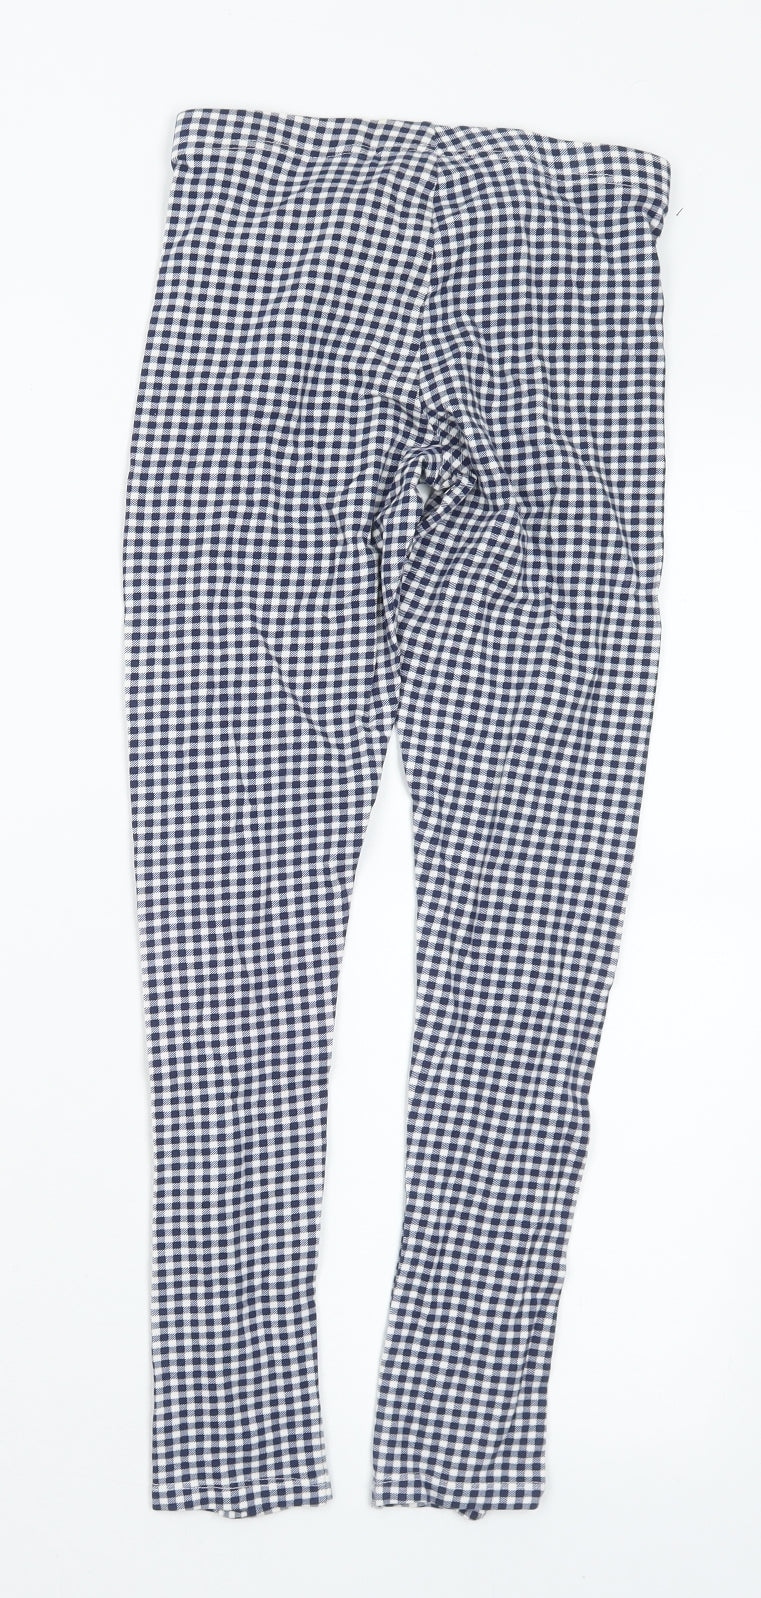 F&F Girls Blue Check Cotton Pedal Pusher Trousers Size 10-11 Years Regular